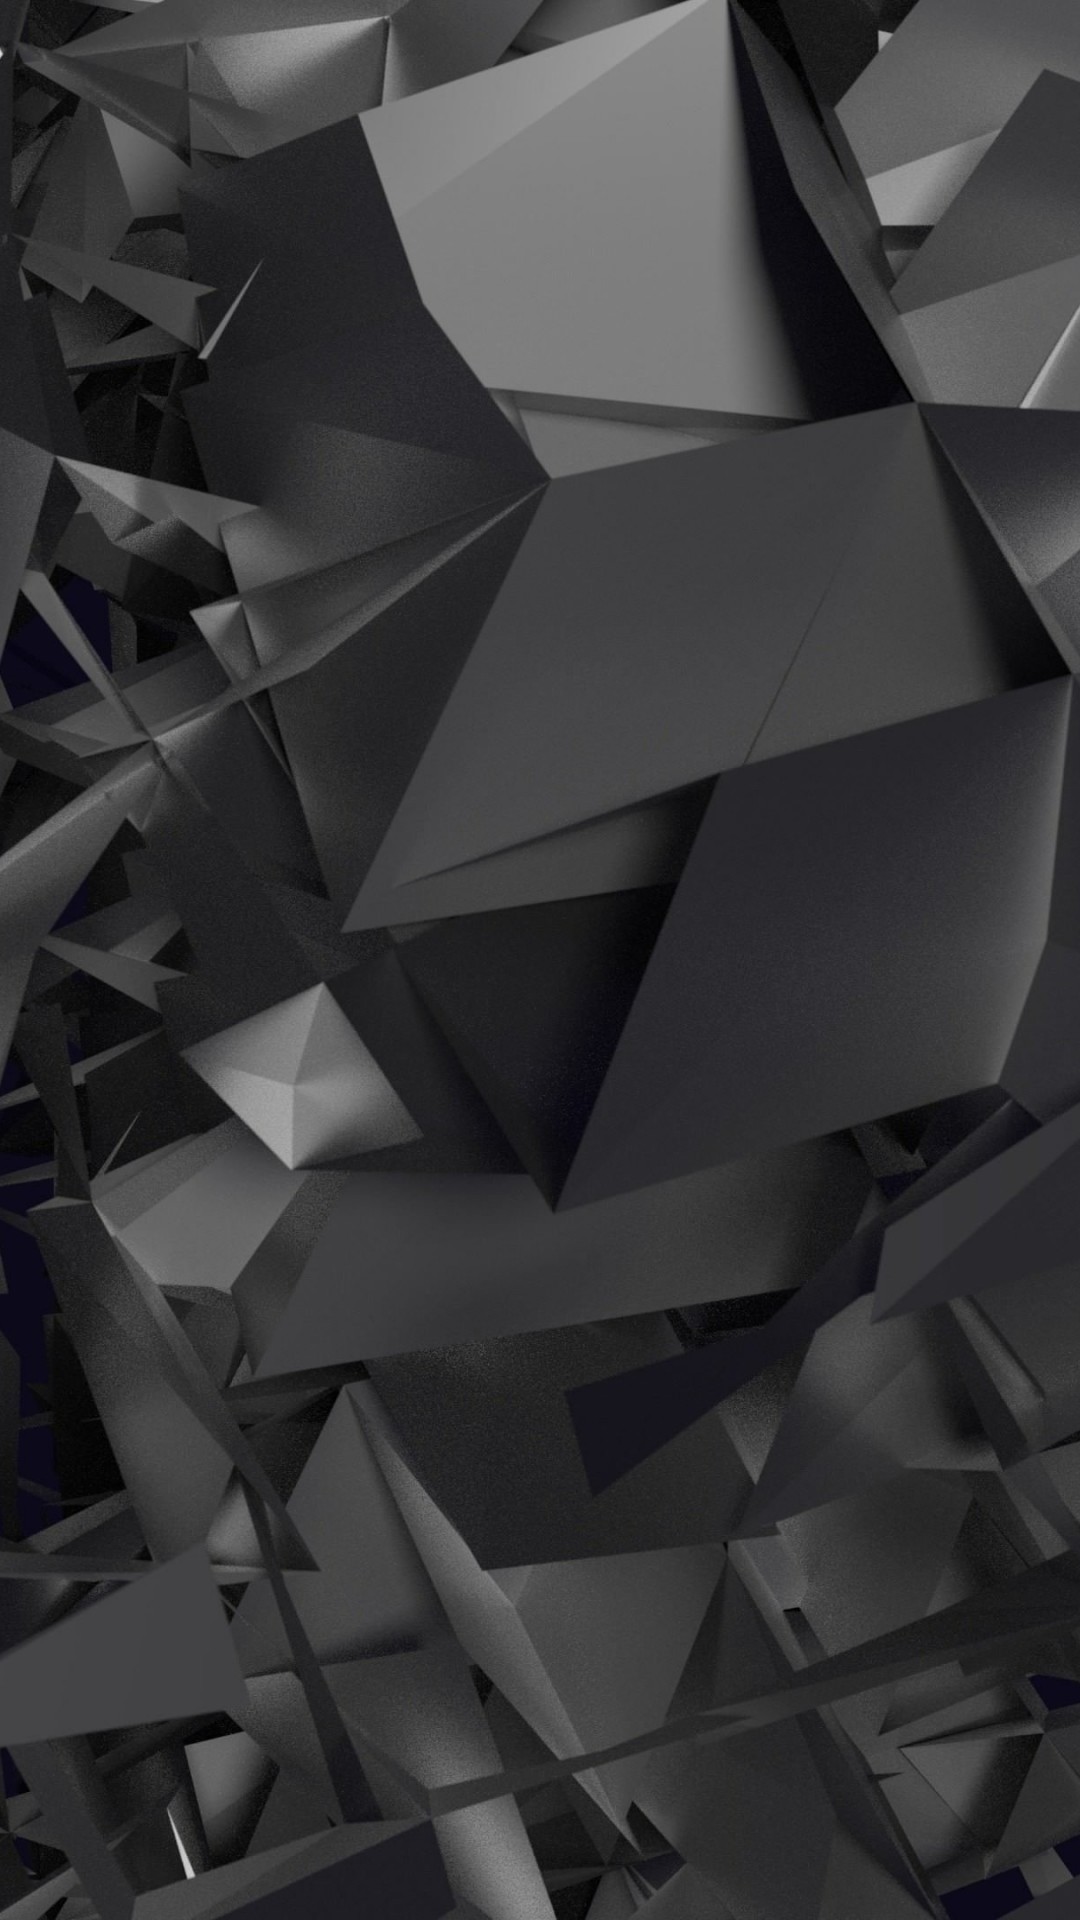 3D Geometry Wallpaper for HTC One